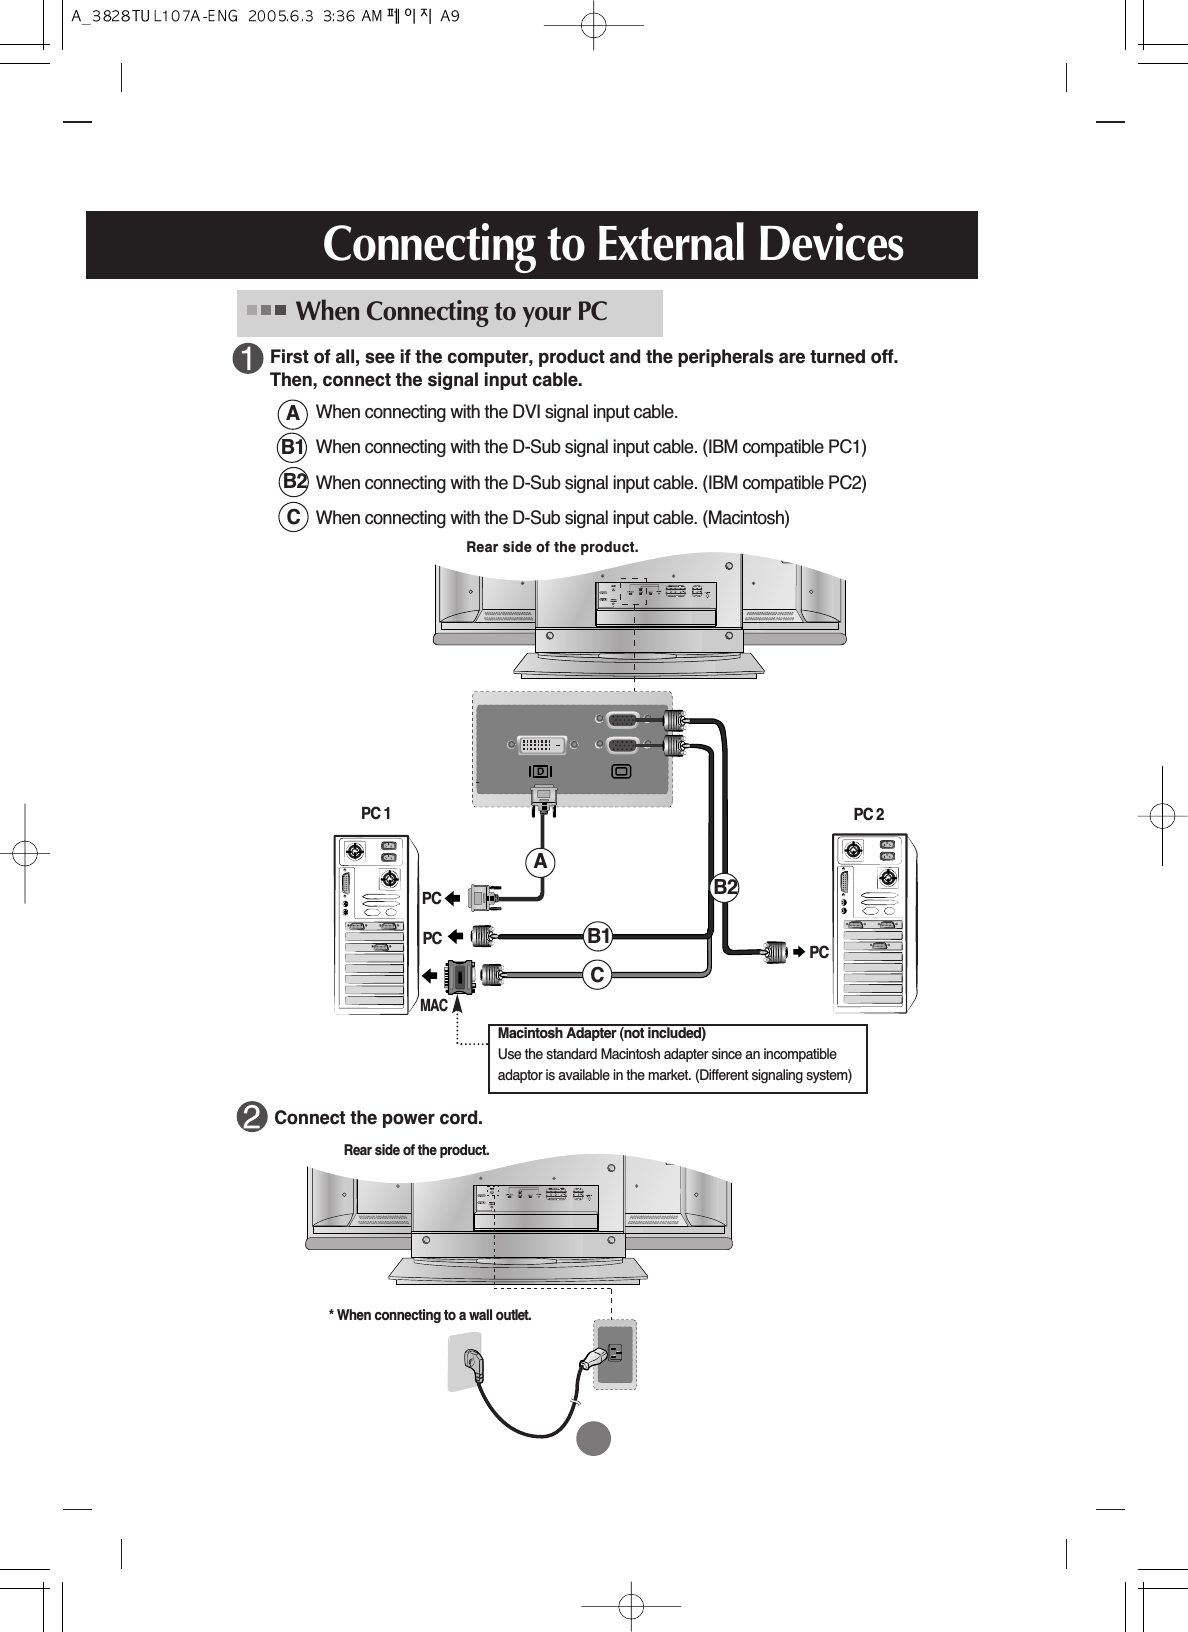 First of all, see if the computer, product and the peripherals are turned off. Then, connect the signal input cable.When connecting with the DVI signal input cable.When connecting with the D-Sub signal input cable. (IBM compatible PC1)When connecting with the D-Sub signal input cable. (IBM compatible PC2)When connecting with the D-Sub signal input cable. (Macintosh)PCPC 1Rear side of the product.MACMacintosh Adapter (not included)Use the standard Macintosh adapter since an incompatibleadaptor is available in the market. (Different signaling system)Rear side of the product.* When connecting to a wall outlet.Connecting to External DevicesConnect the power cord.B1CAB1CAPC 2B2B2PC PCWhen Connecting to your PC